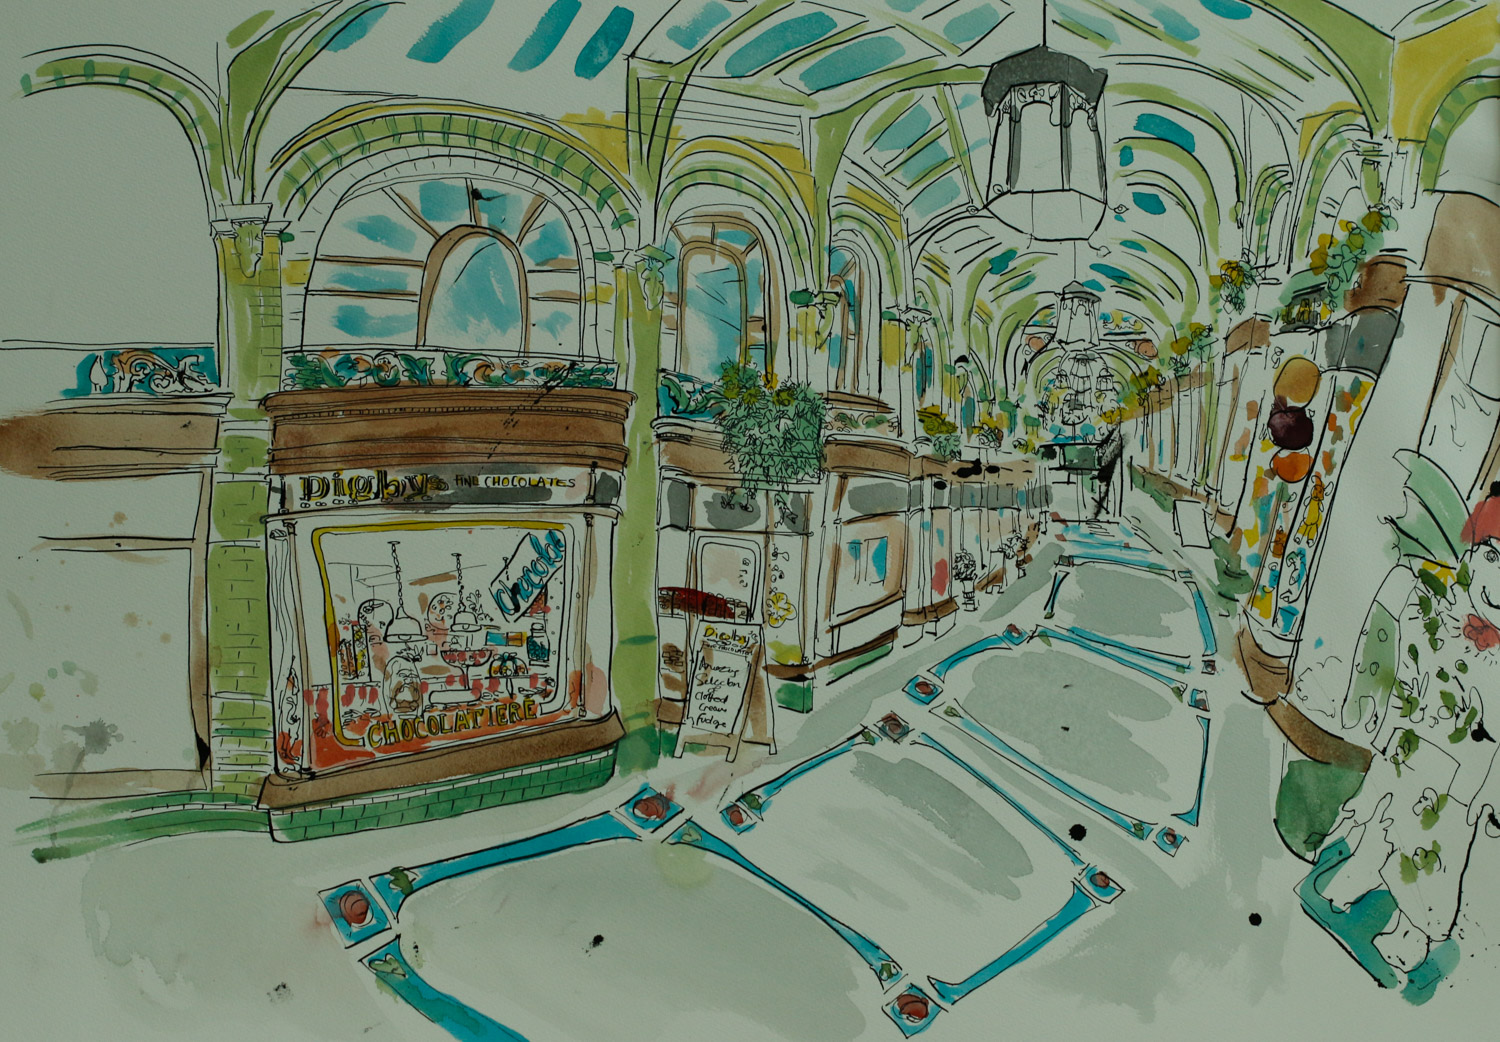 Artist Eloise O'Hare - Chocolate Arcade 18x26.5 Pen, Ink & Watercolour on Paper at Paint Out Norwich 2015